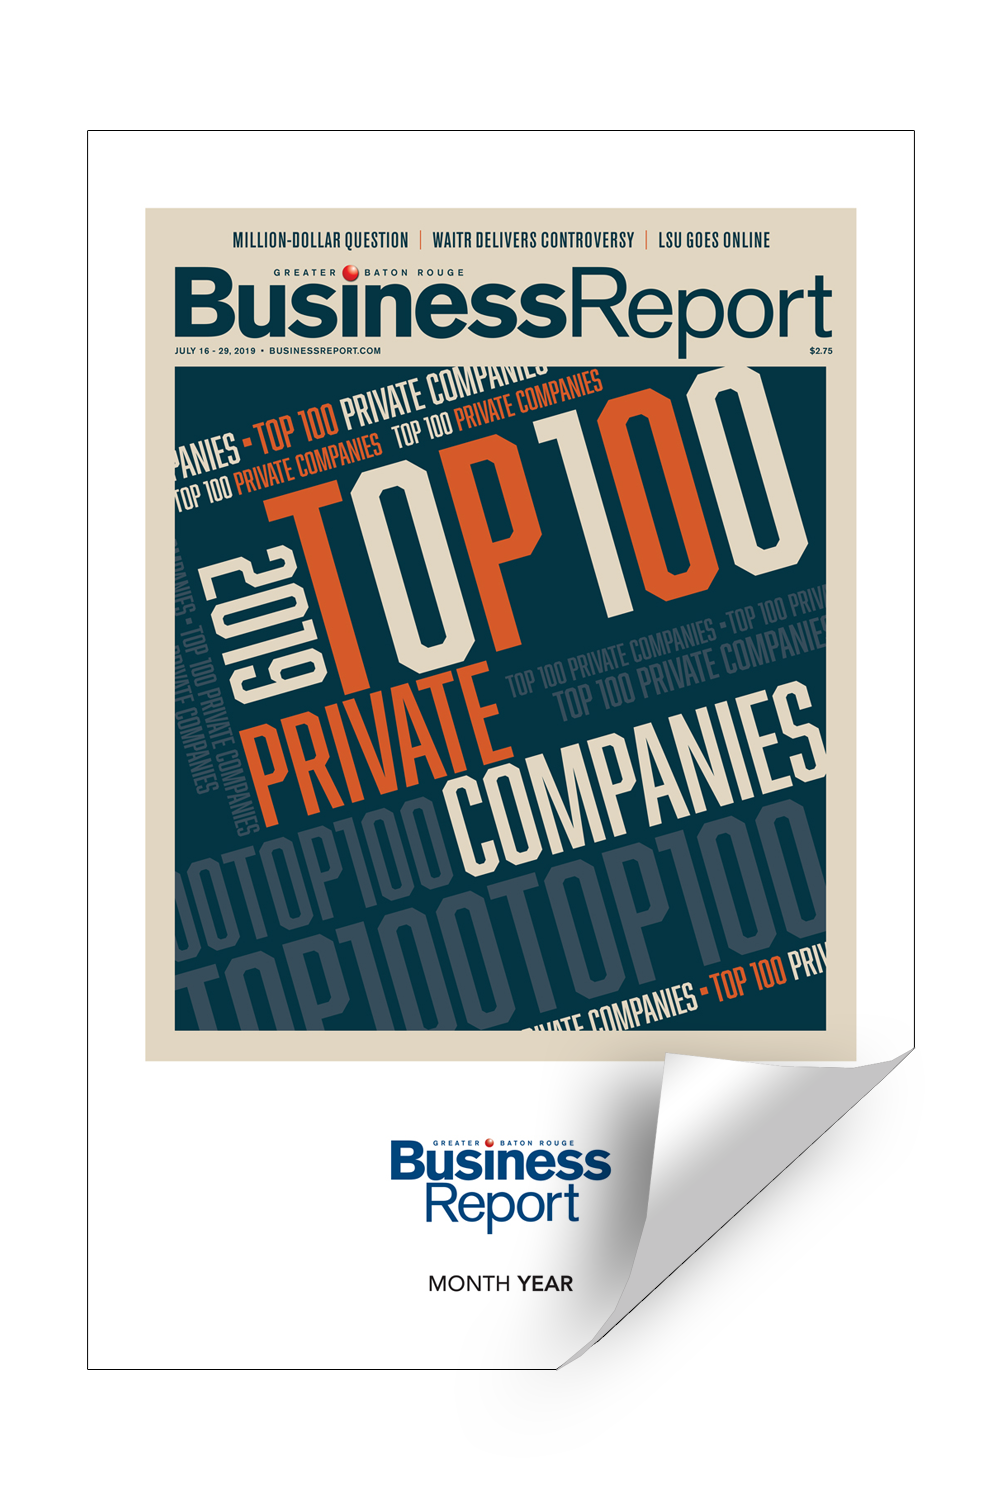 Business Report Article & Cover Digital PDFs